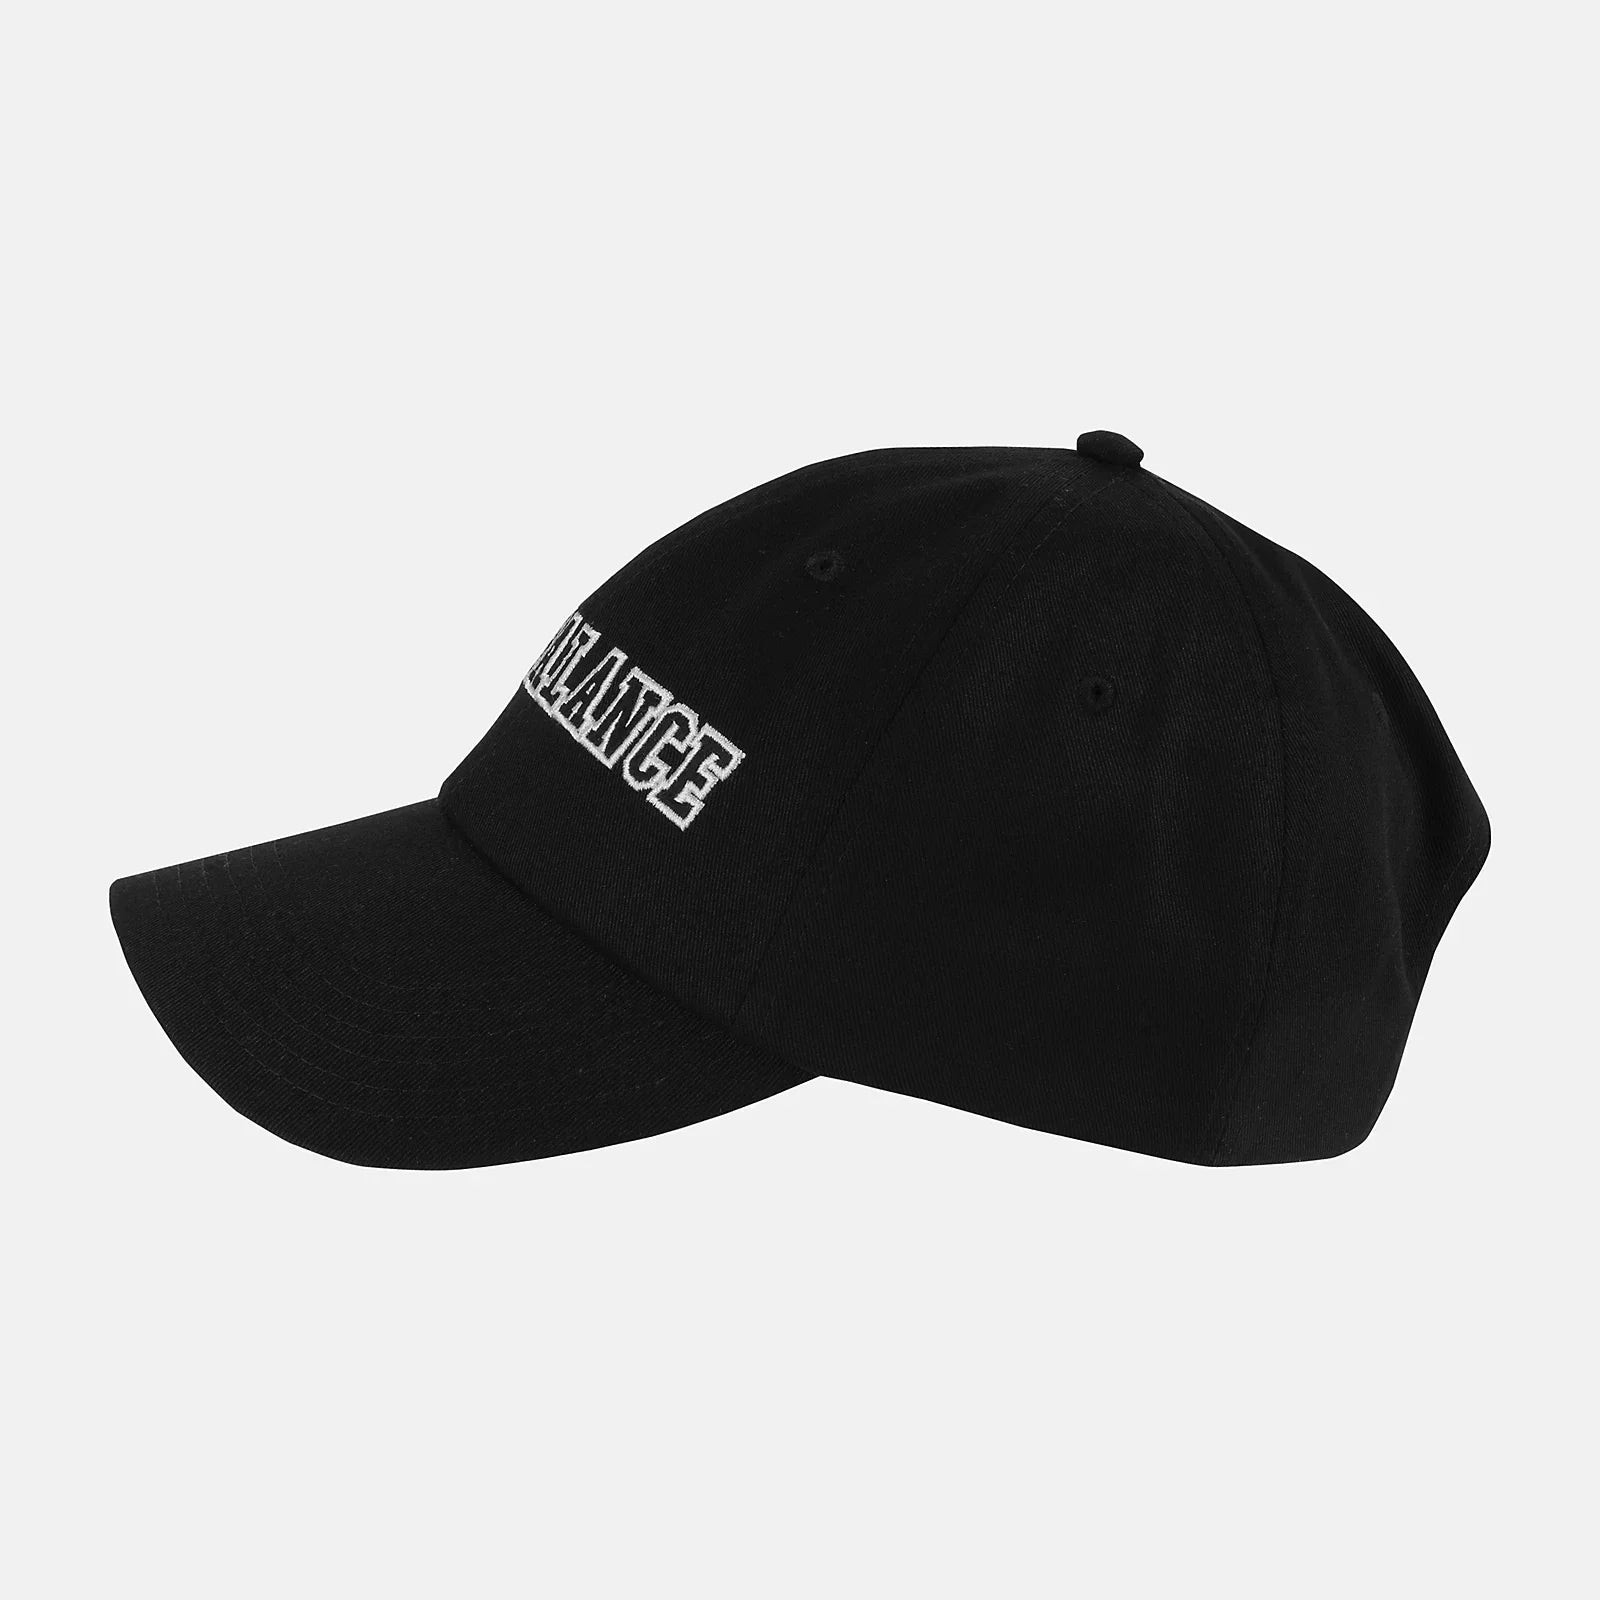 NEW BALANCE NB Logo Hat in Black LAH21002 O/S BLACK FROM EIGHTYWINGOLD - OFFICIAL BRAND PARTNER